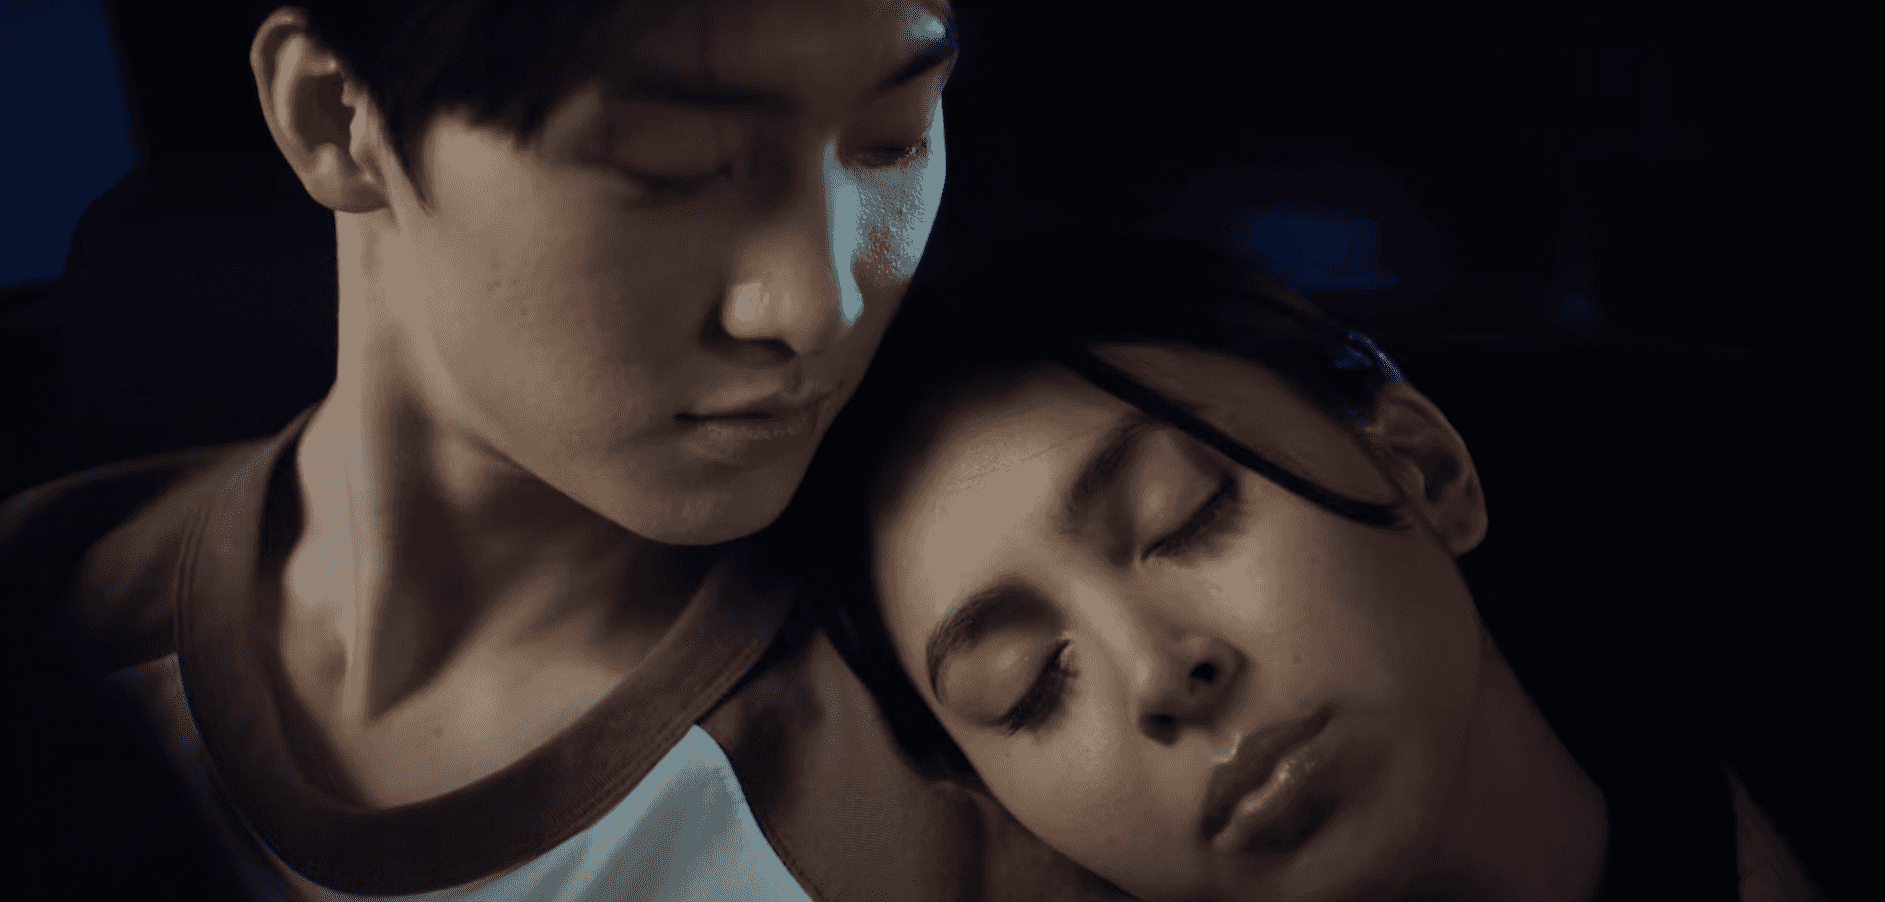 WATCH: ‘Secret Ingredient’ drops teaser starring Sang-heon Lee and Julia Barretto